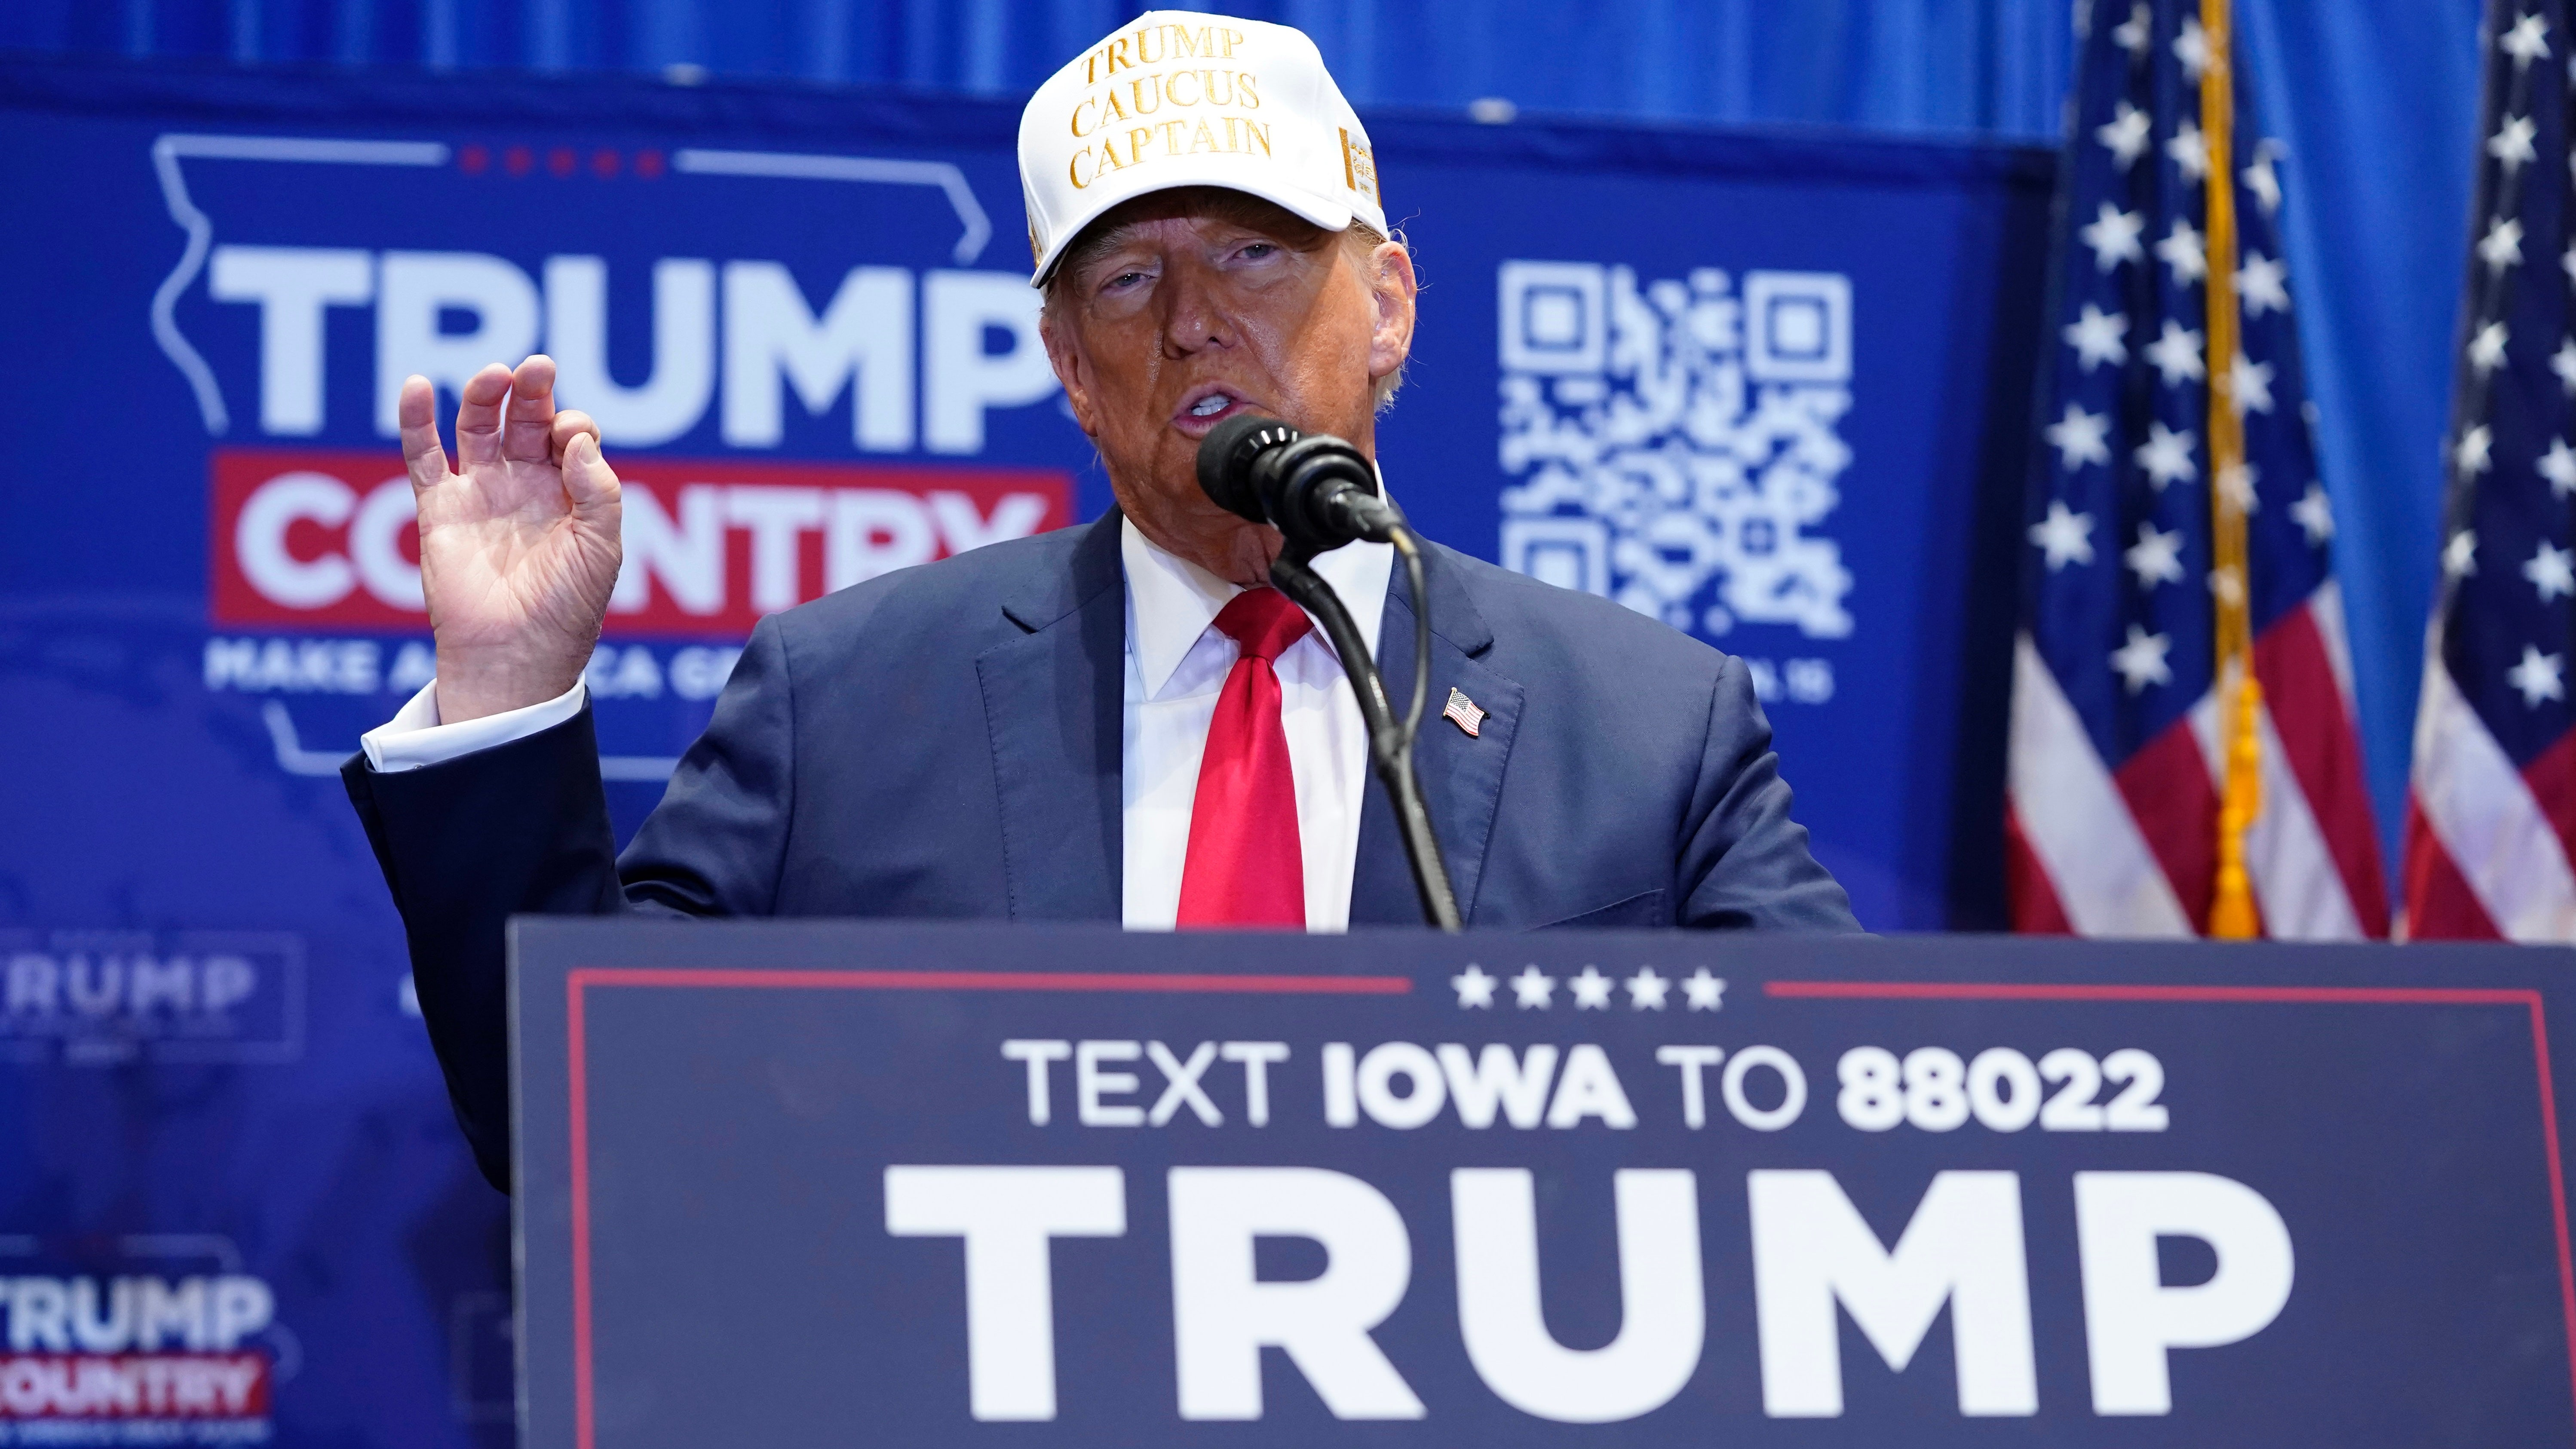 Donald Trump wins Iowa caucuses, solidifying his position as the leading Republican candidate for the 2024 presidential race